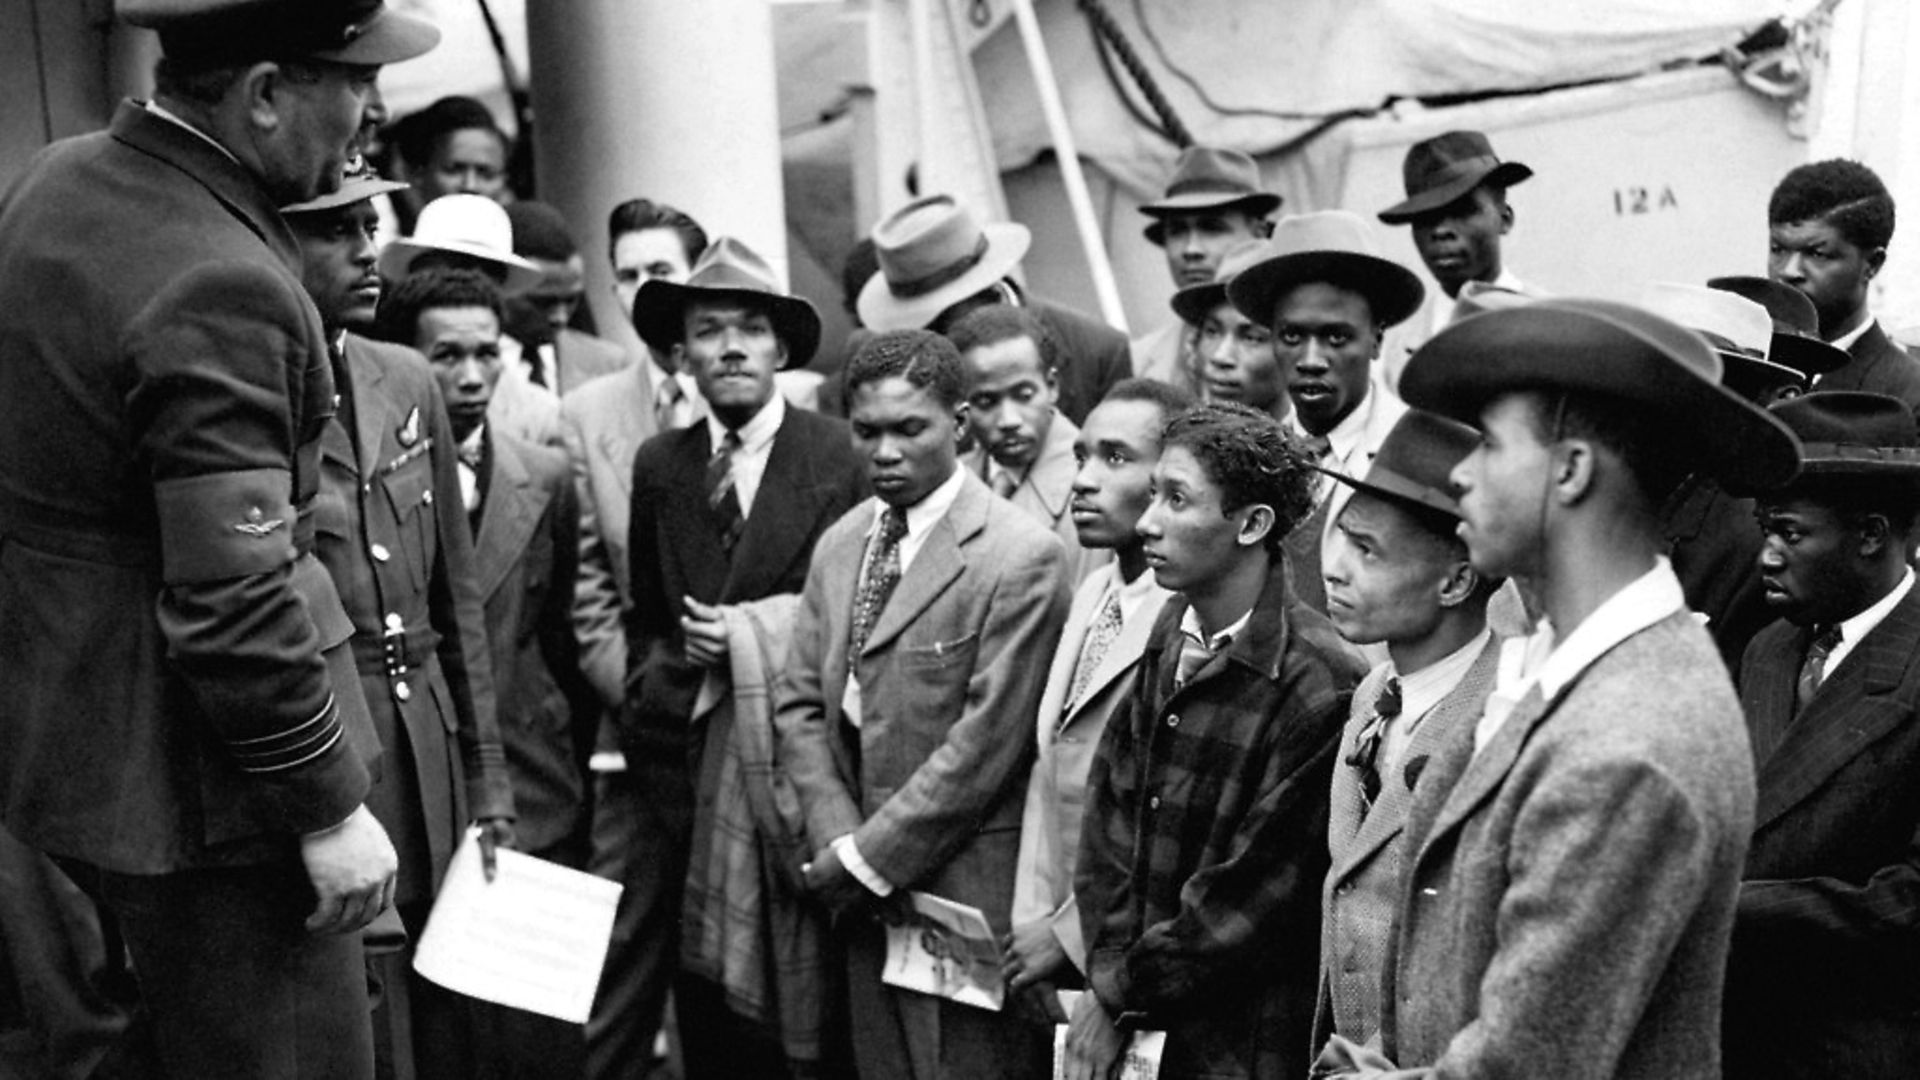 Jamaican immigrants welcomed by RAF officials from the Colonial Office after the ex-troopship HMT 'Empire Windrush' landed them at Tilbury.
Photo: PA - Credit: PA Archive/PA Images